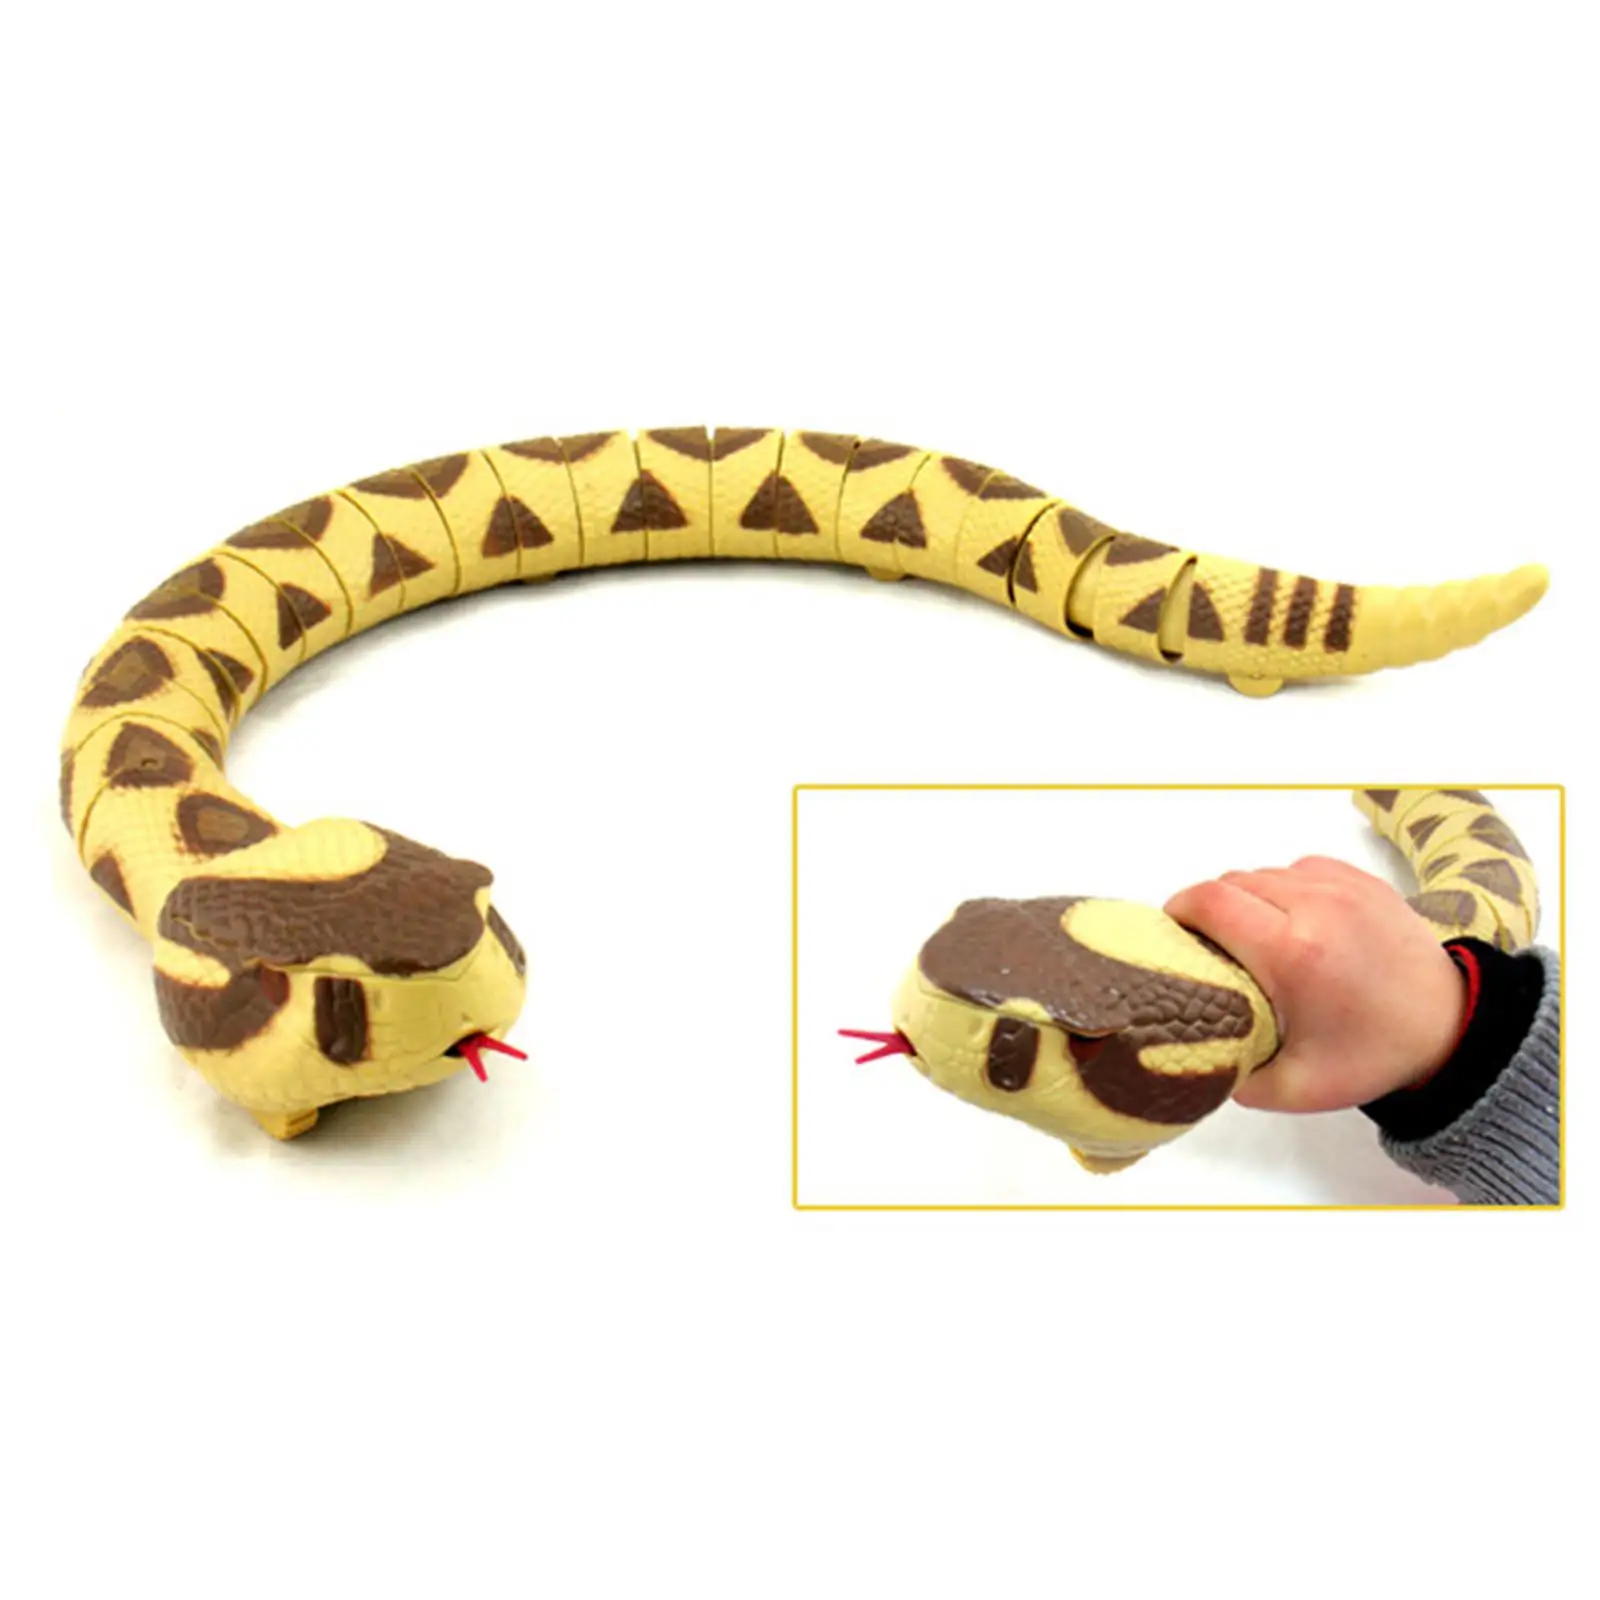 Lifelike RC Snake Toys Scary Snake Toy Halloween Tricks Toy Party Favors for Party Favor Jokes Prop Holiday Gifts